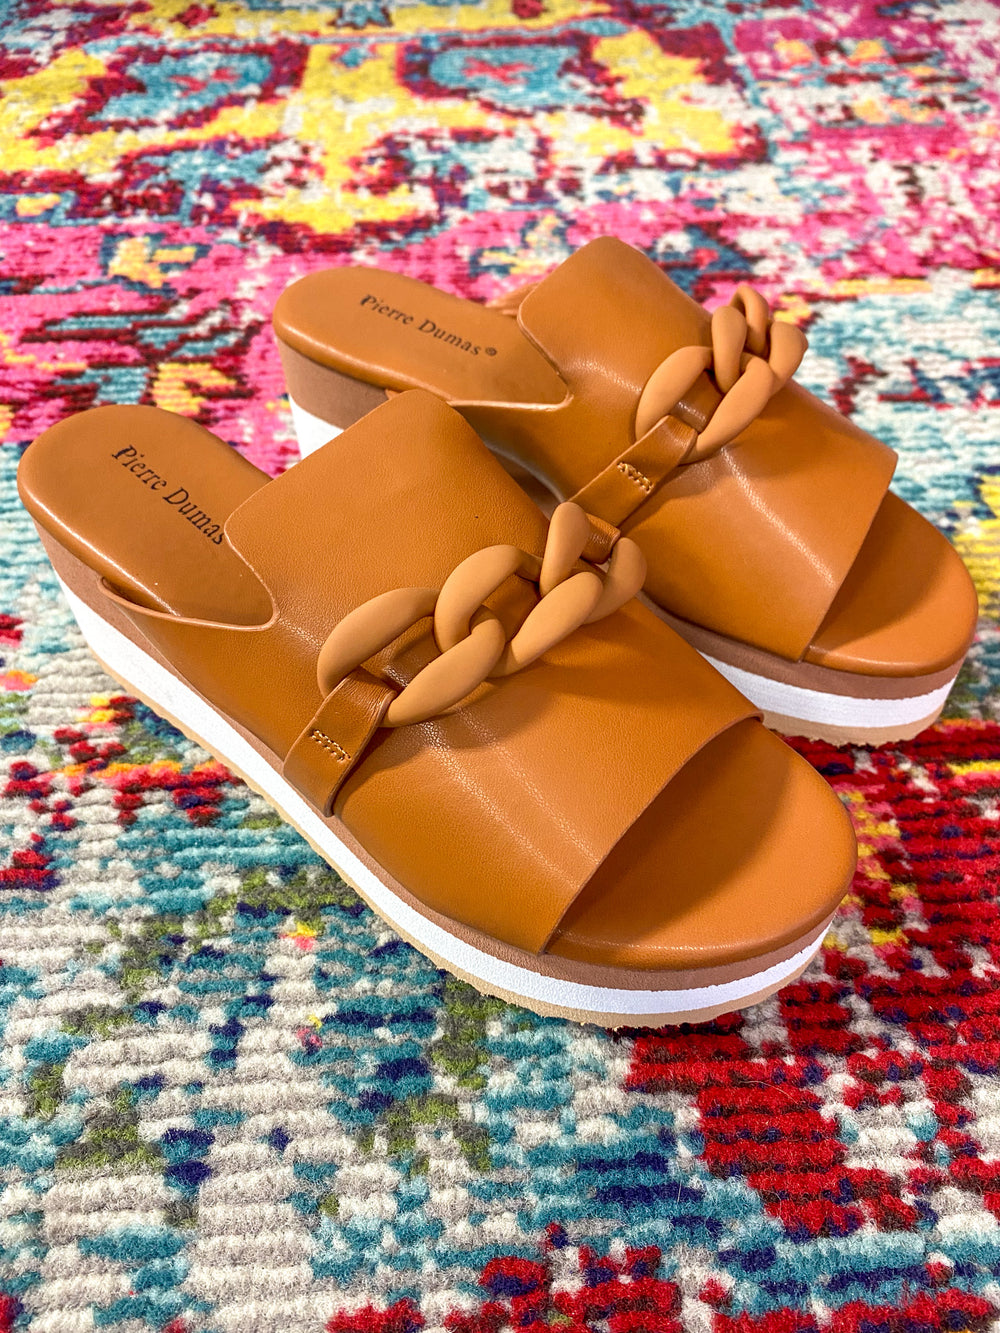 Can't Be Defeated Platform Wedges - New Tan